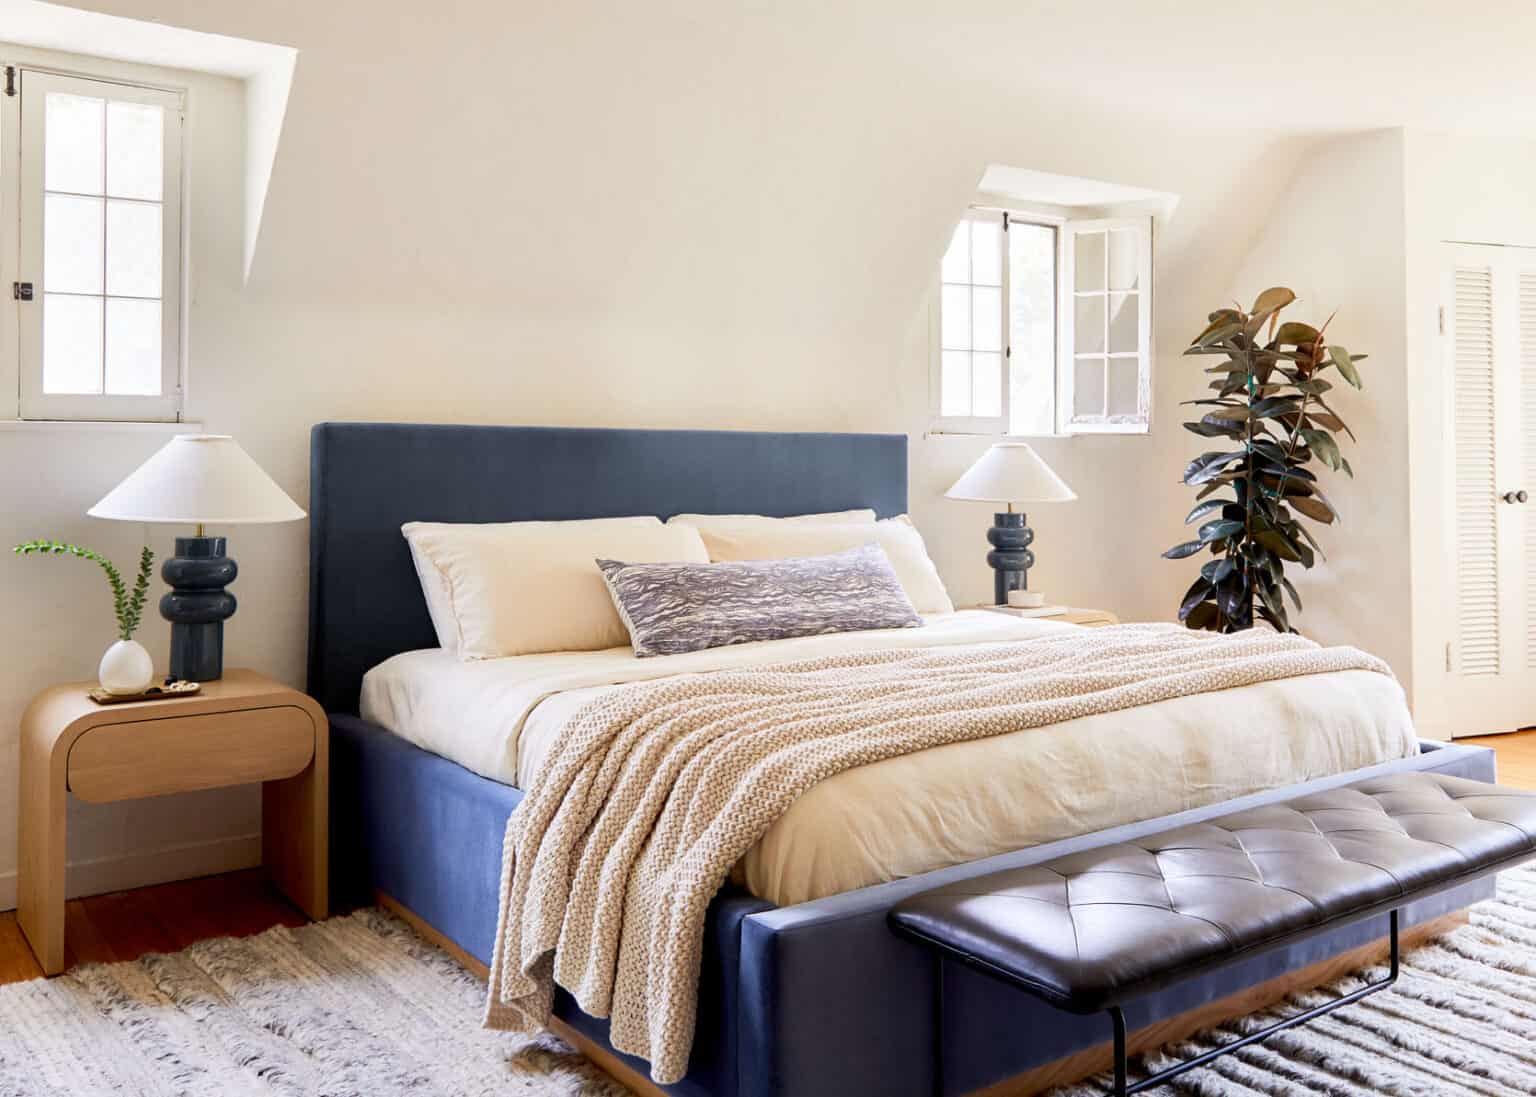 Power Couples: Bed And Nightstand Combos For Every Style (+ How To Pick The Right Size)